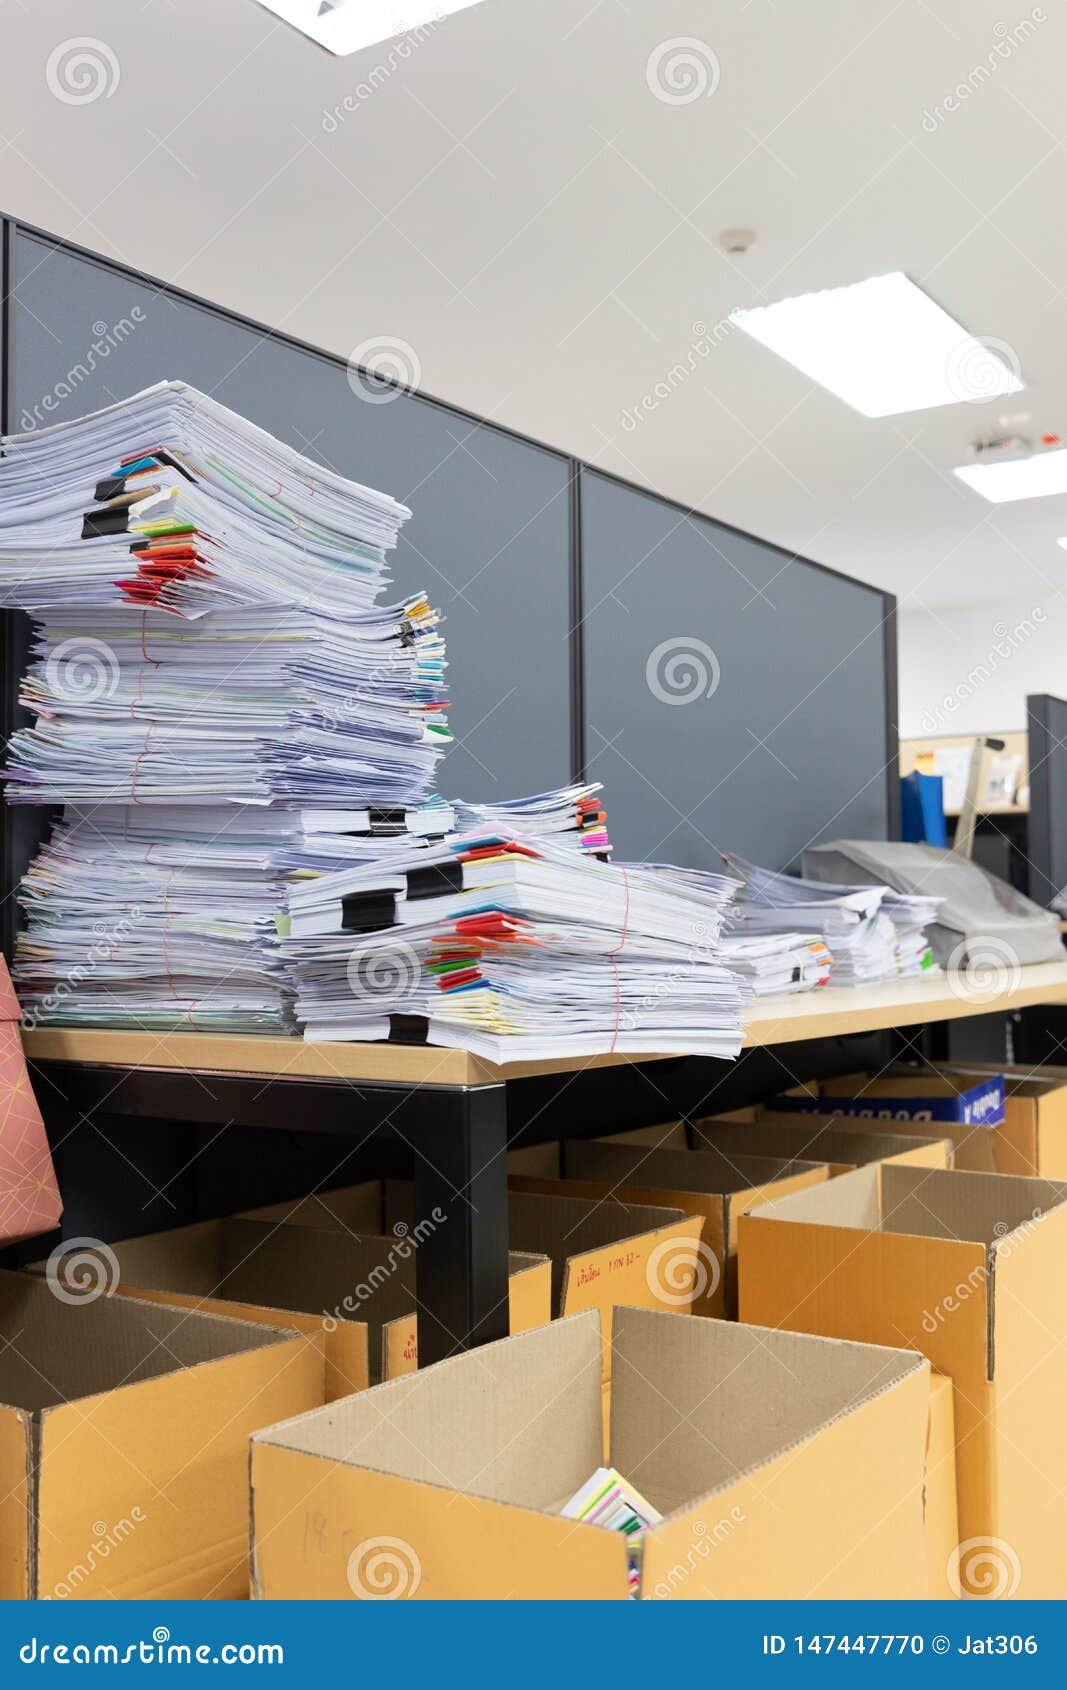 Business And Finance Concept Of Office Working Pile Of Unfinished